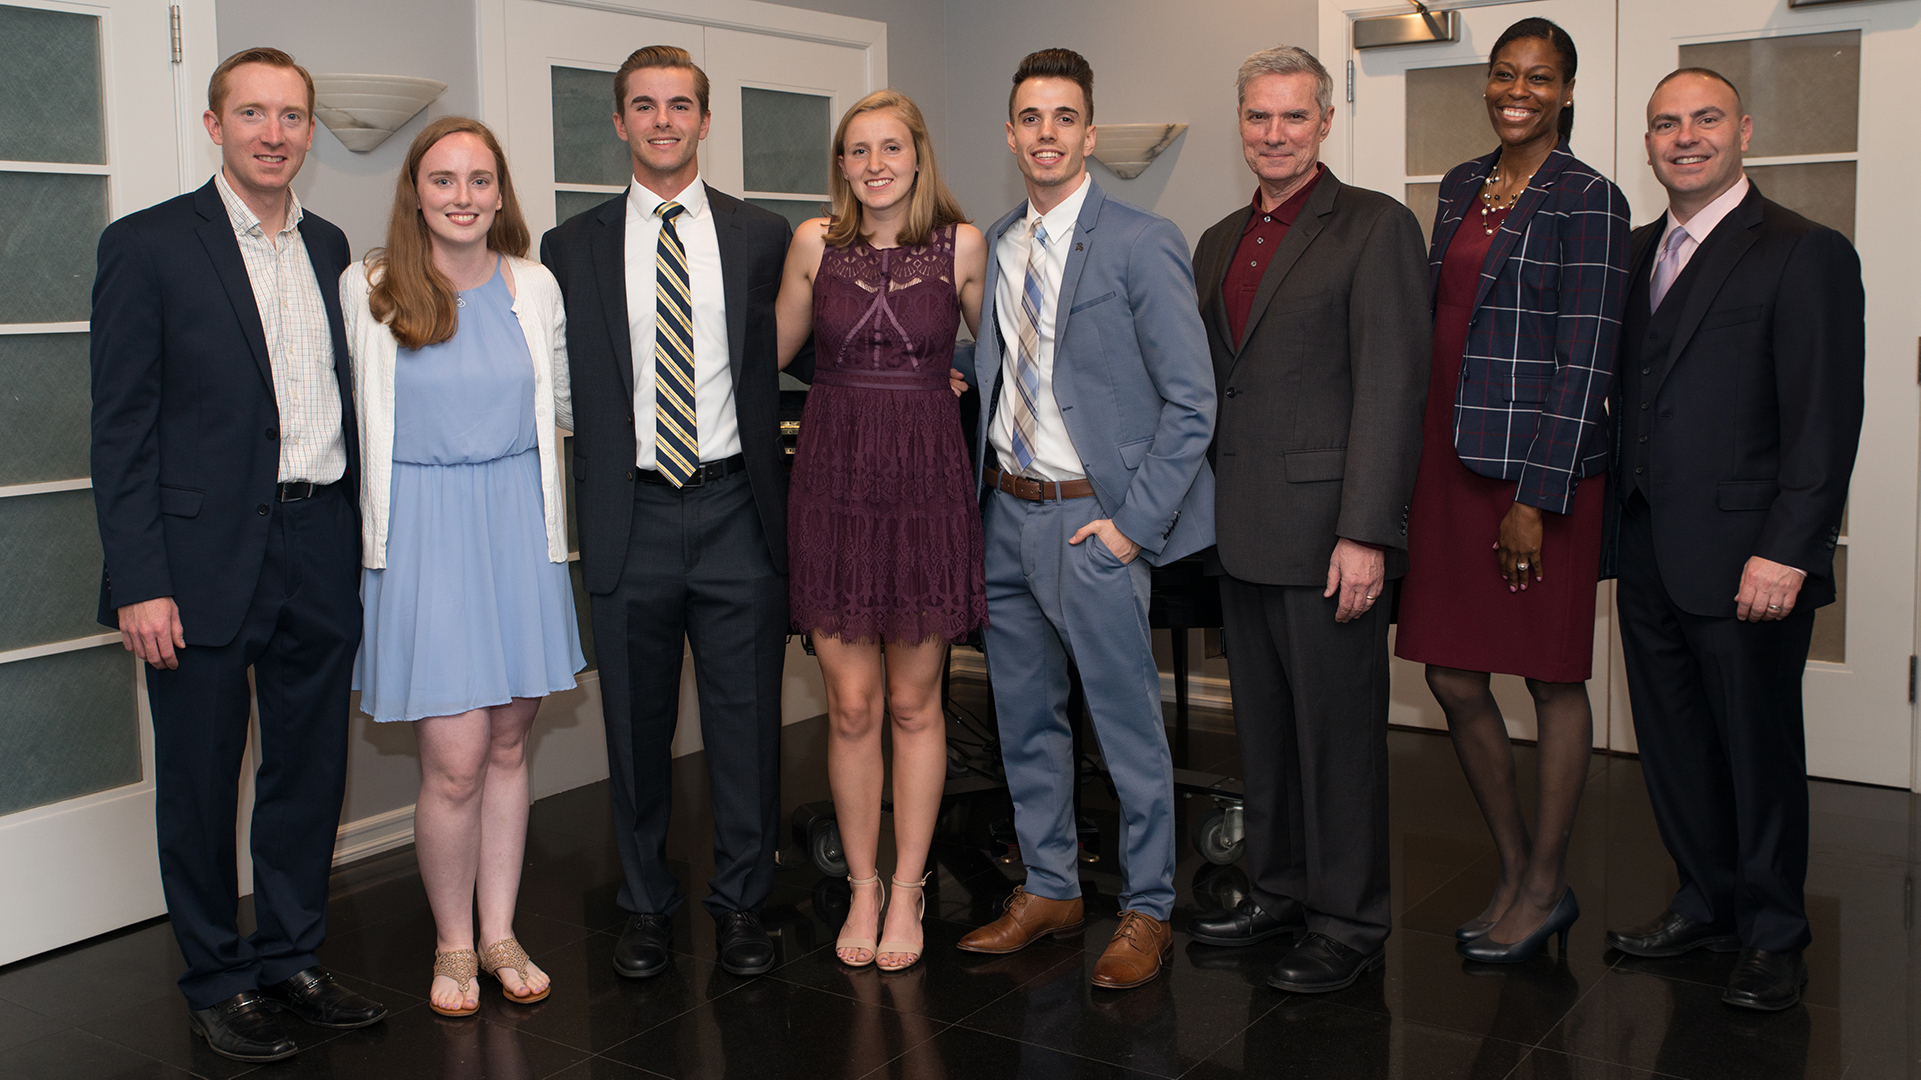 Willis and Doherty Honored as Outstanding Student-Athletes at 28th Annual SJC Golf Classic